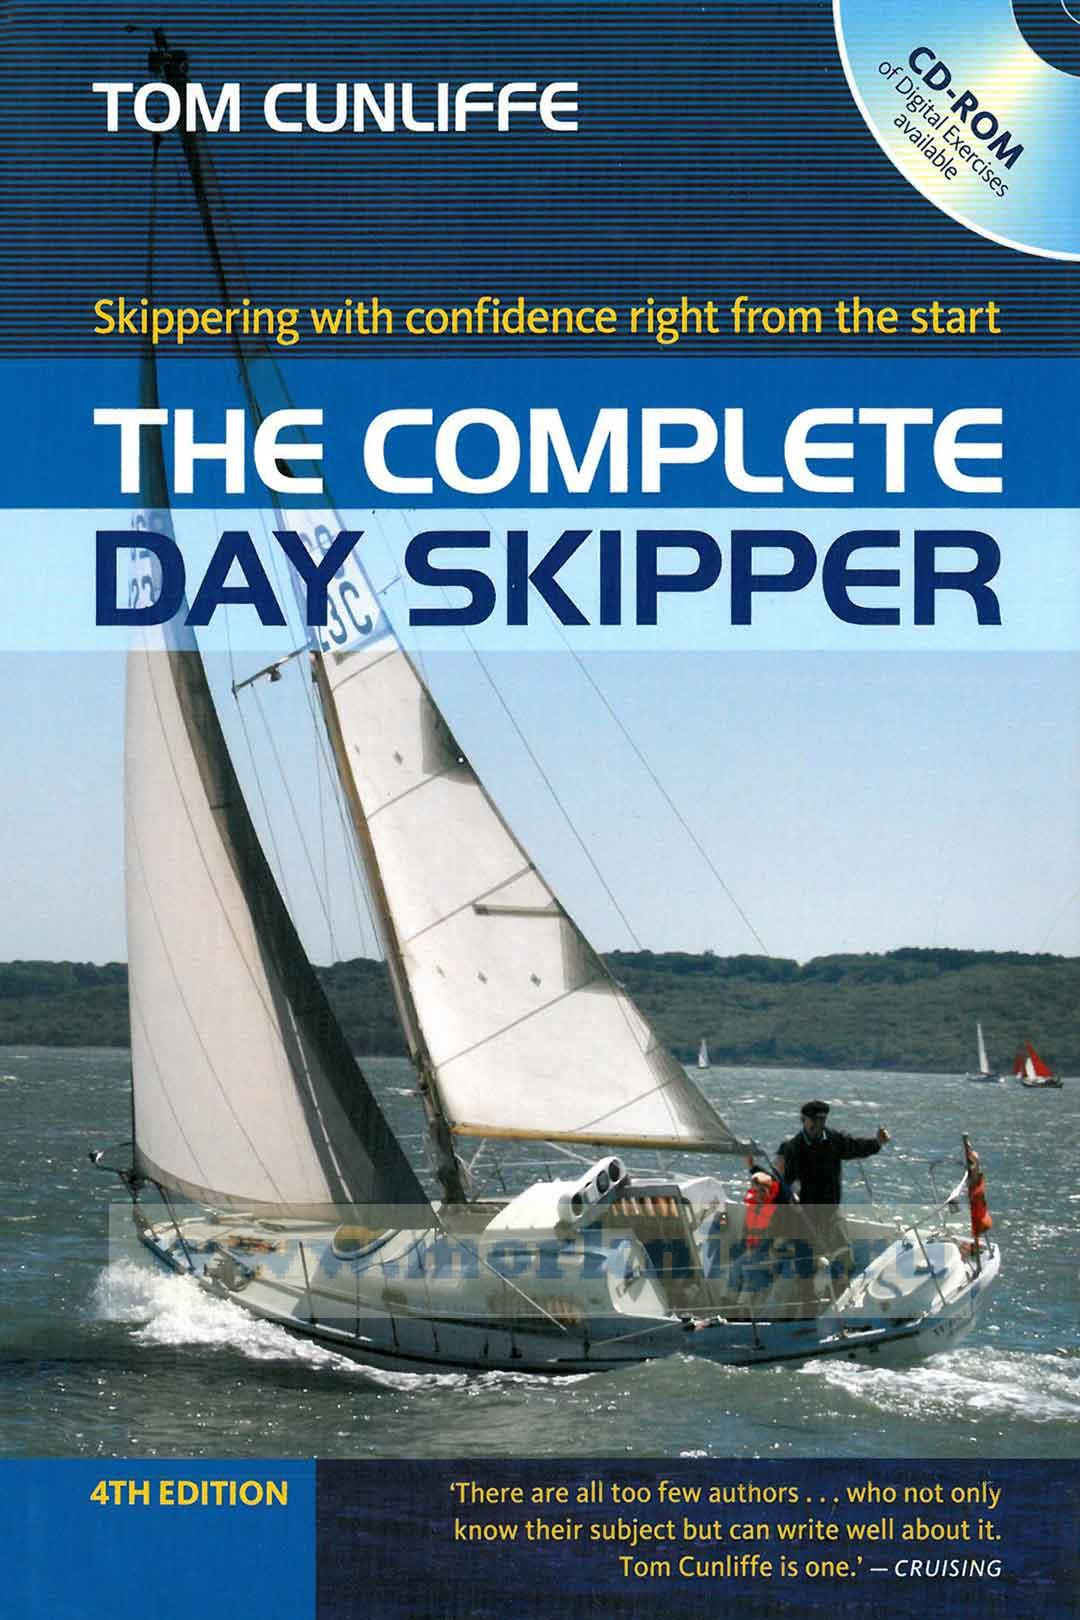 The Complete Day Skipper. 4th edition